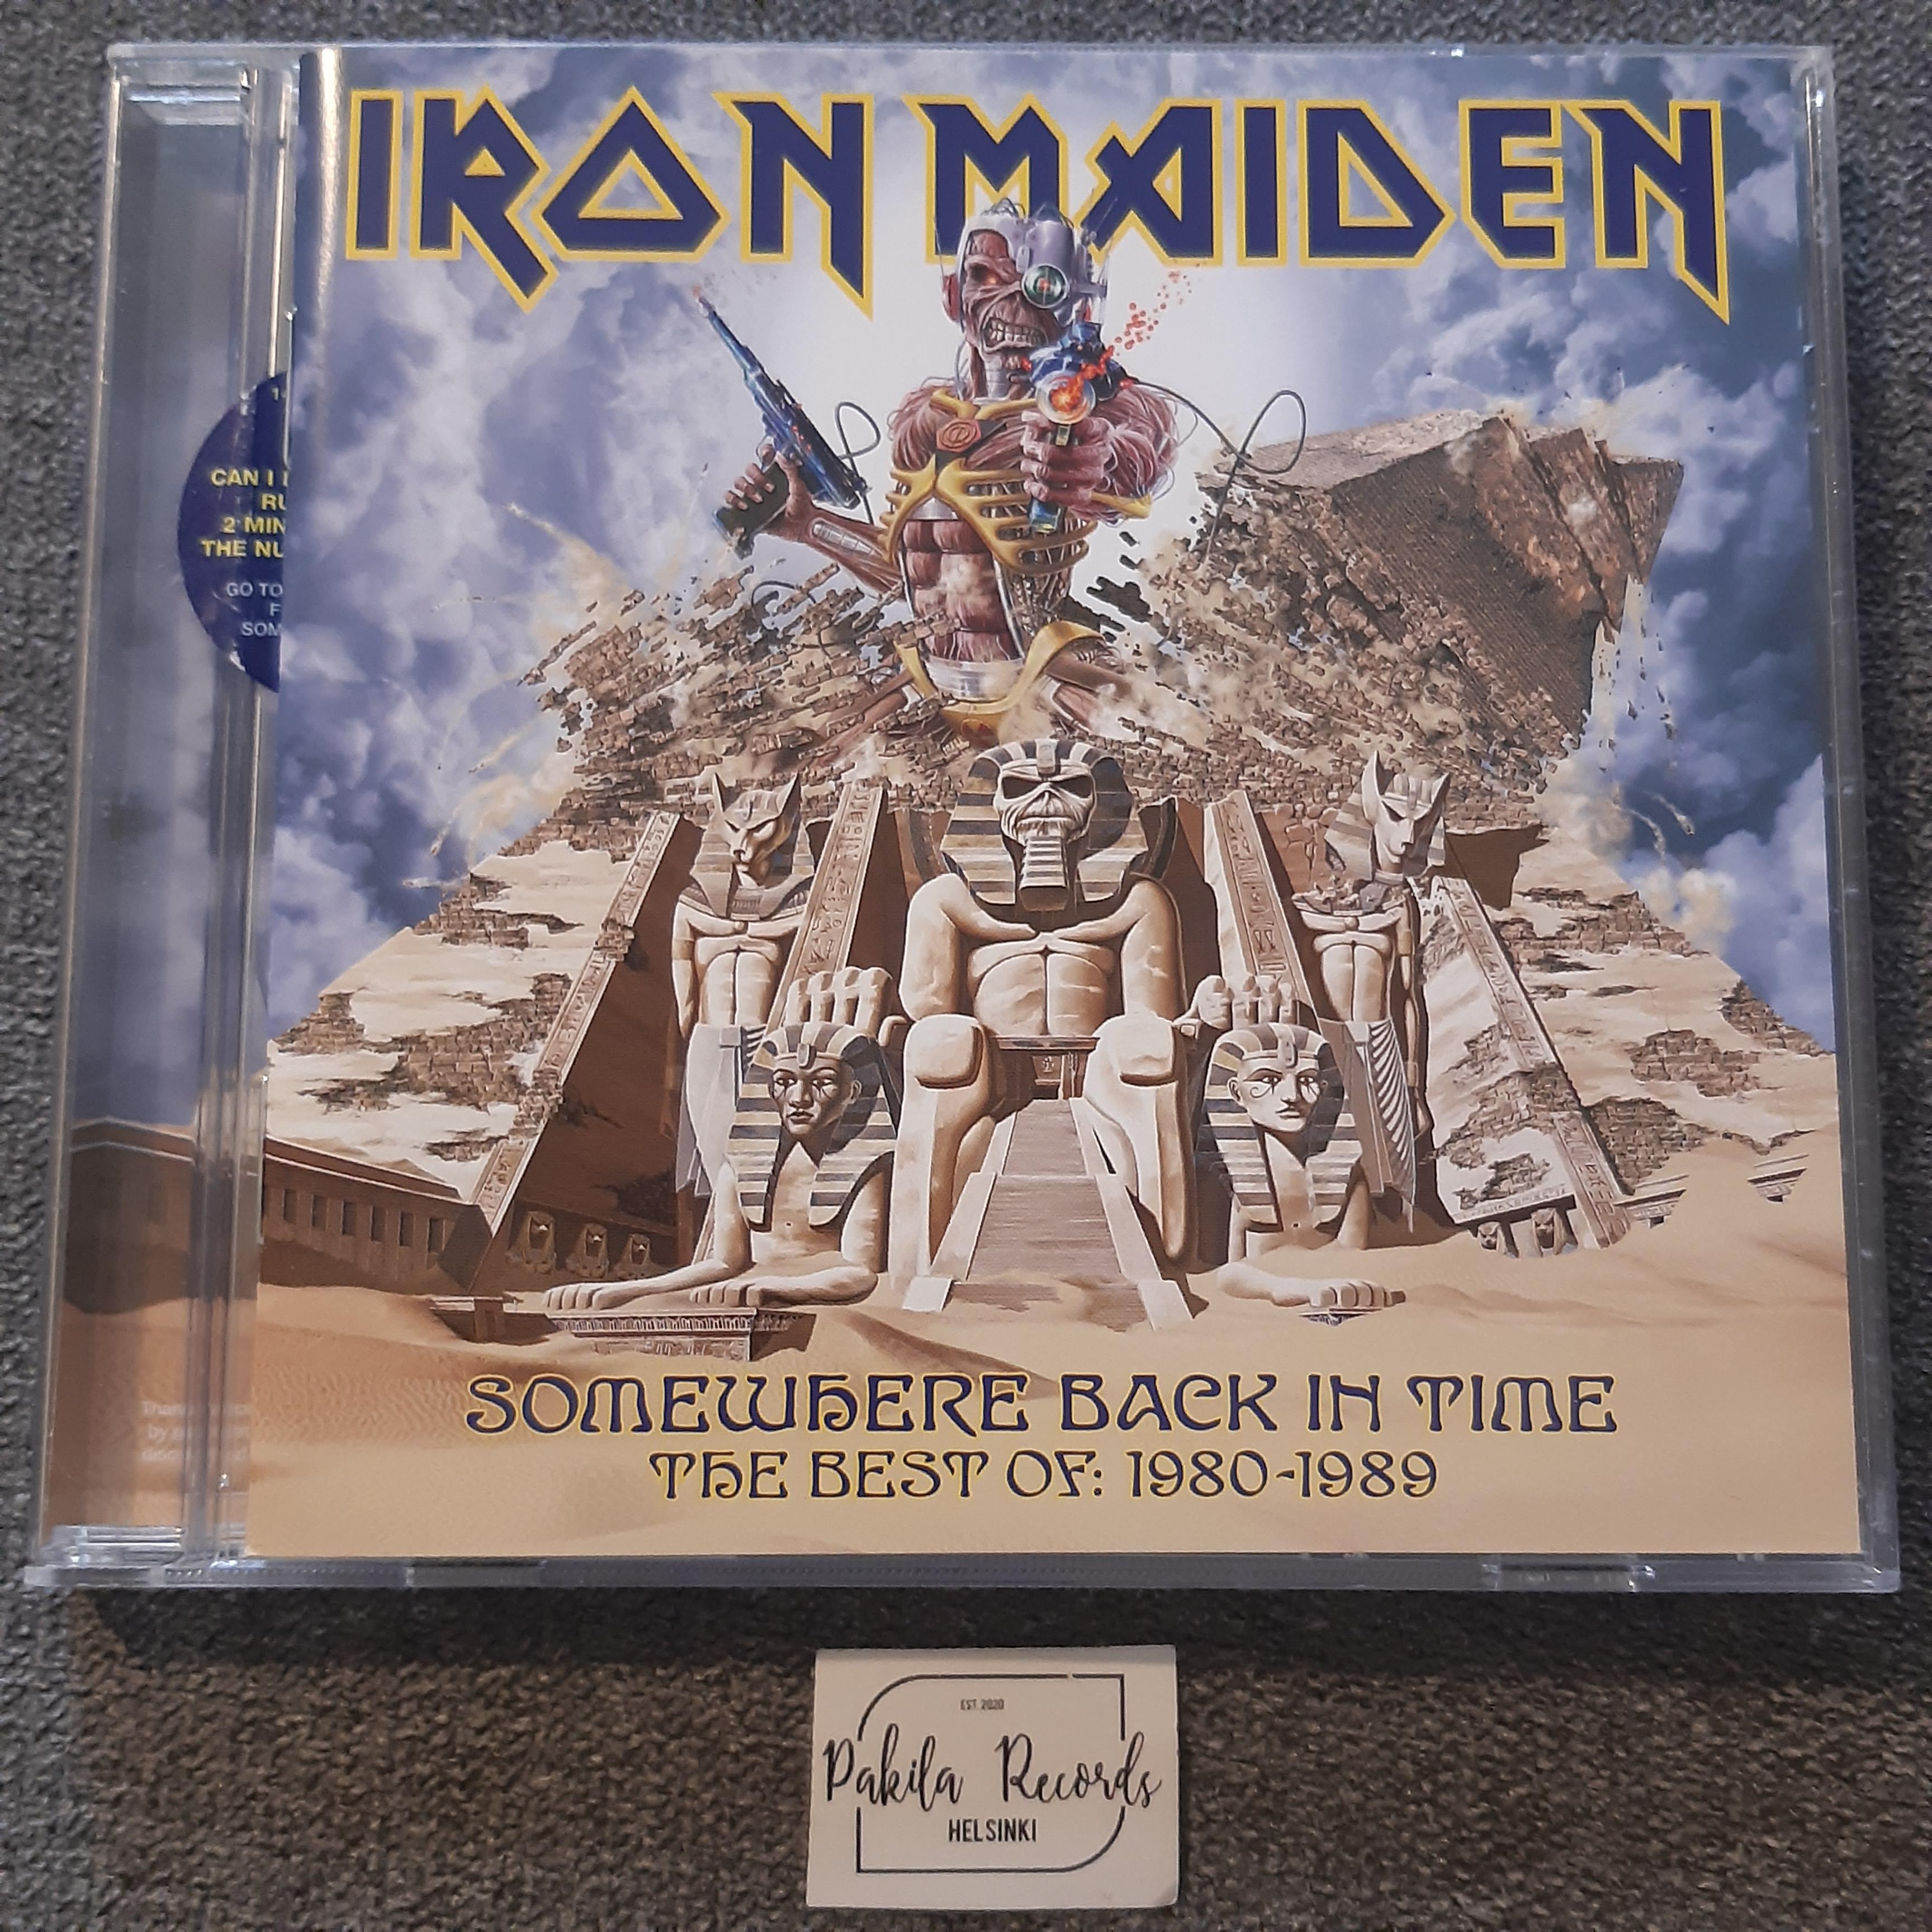 Iron Maiden - Somewhere Back In Time, The Best Of: 1980-1989 - CD (käytetty)